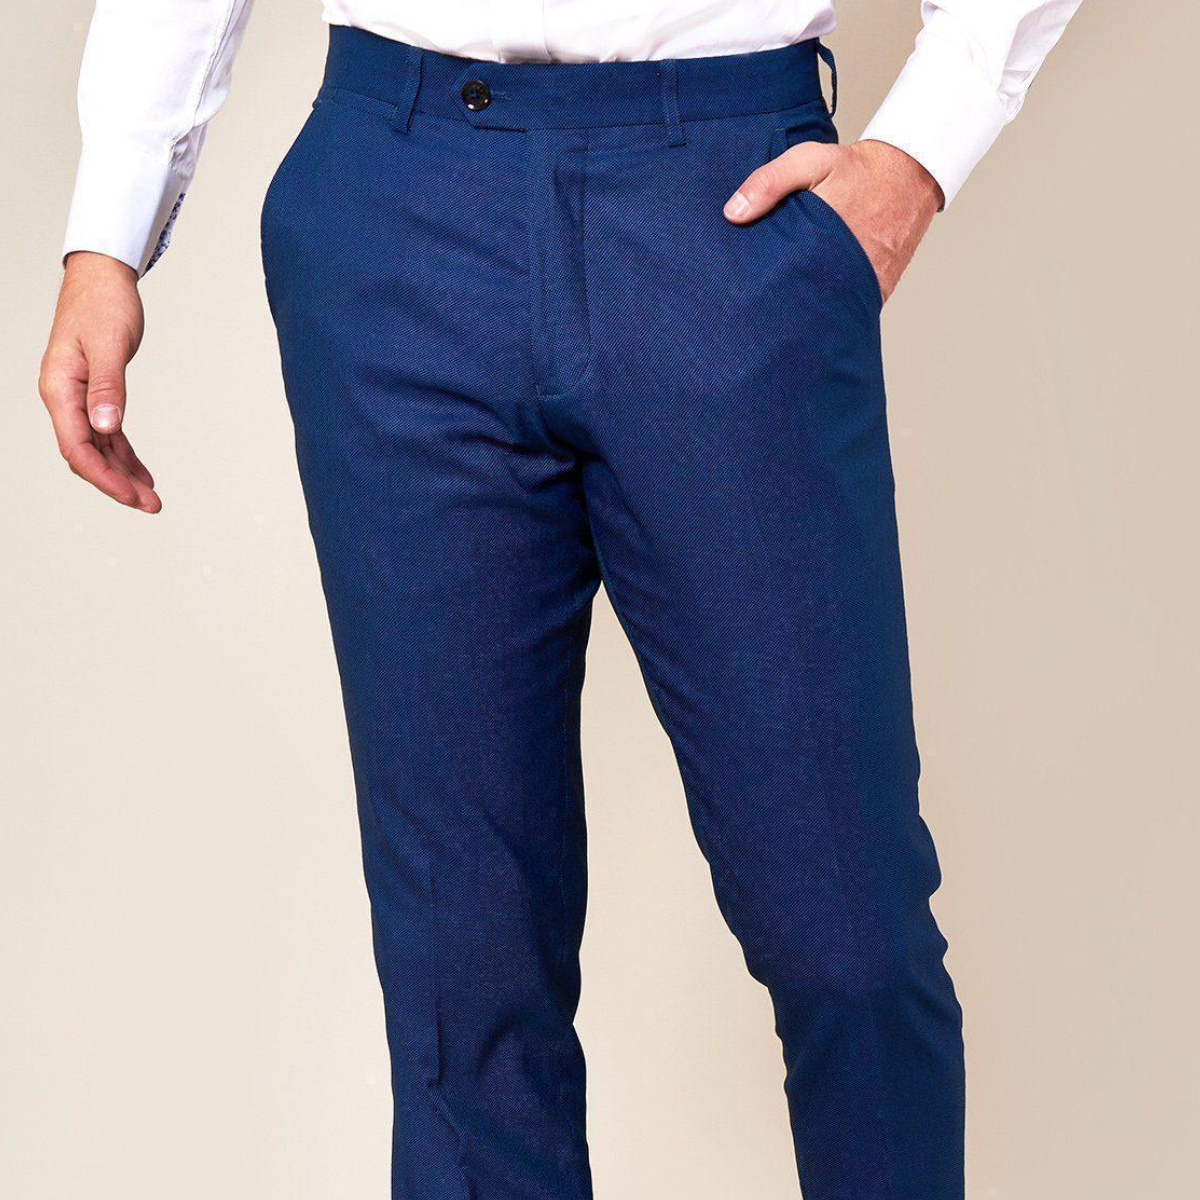 Danny Royal Trousers by Marc Darcy